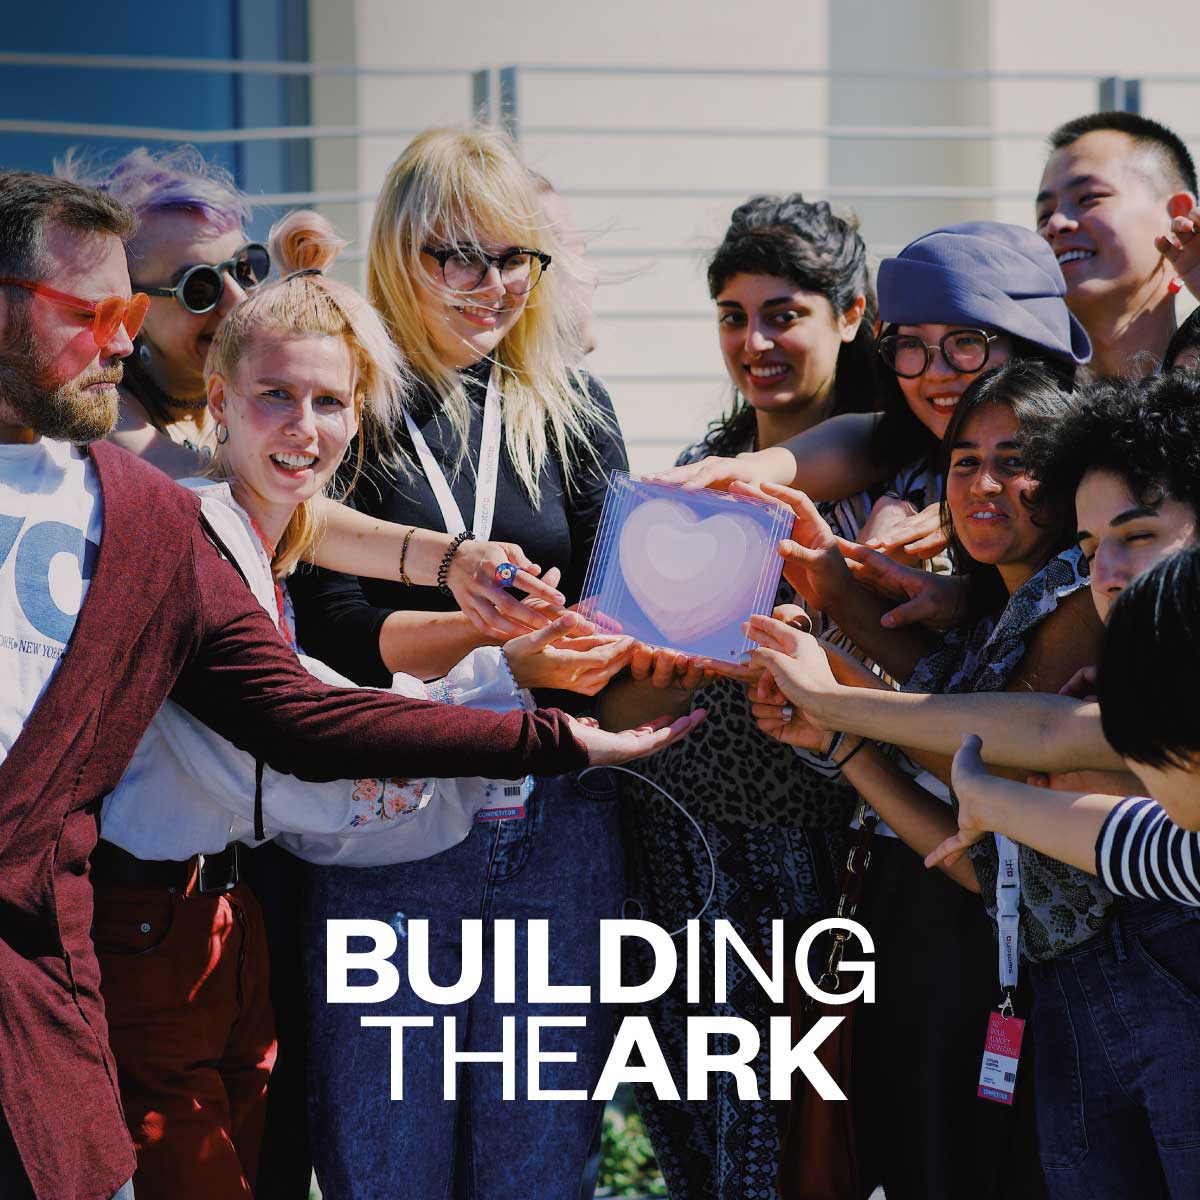 Building the ark heart image